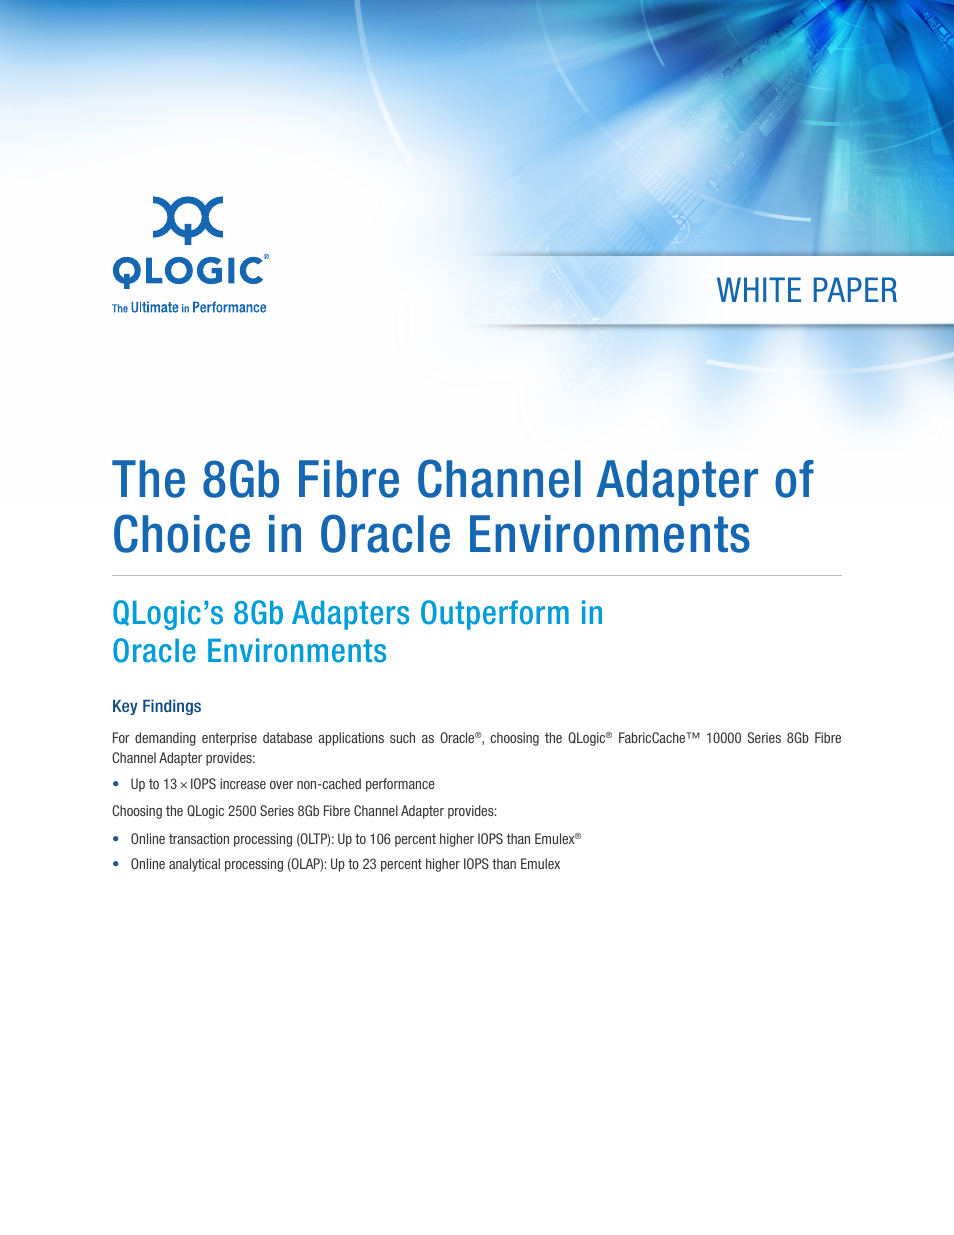 10000 Series The 8Gb Fibre Channel Adapter of Choice in Oracle Environments